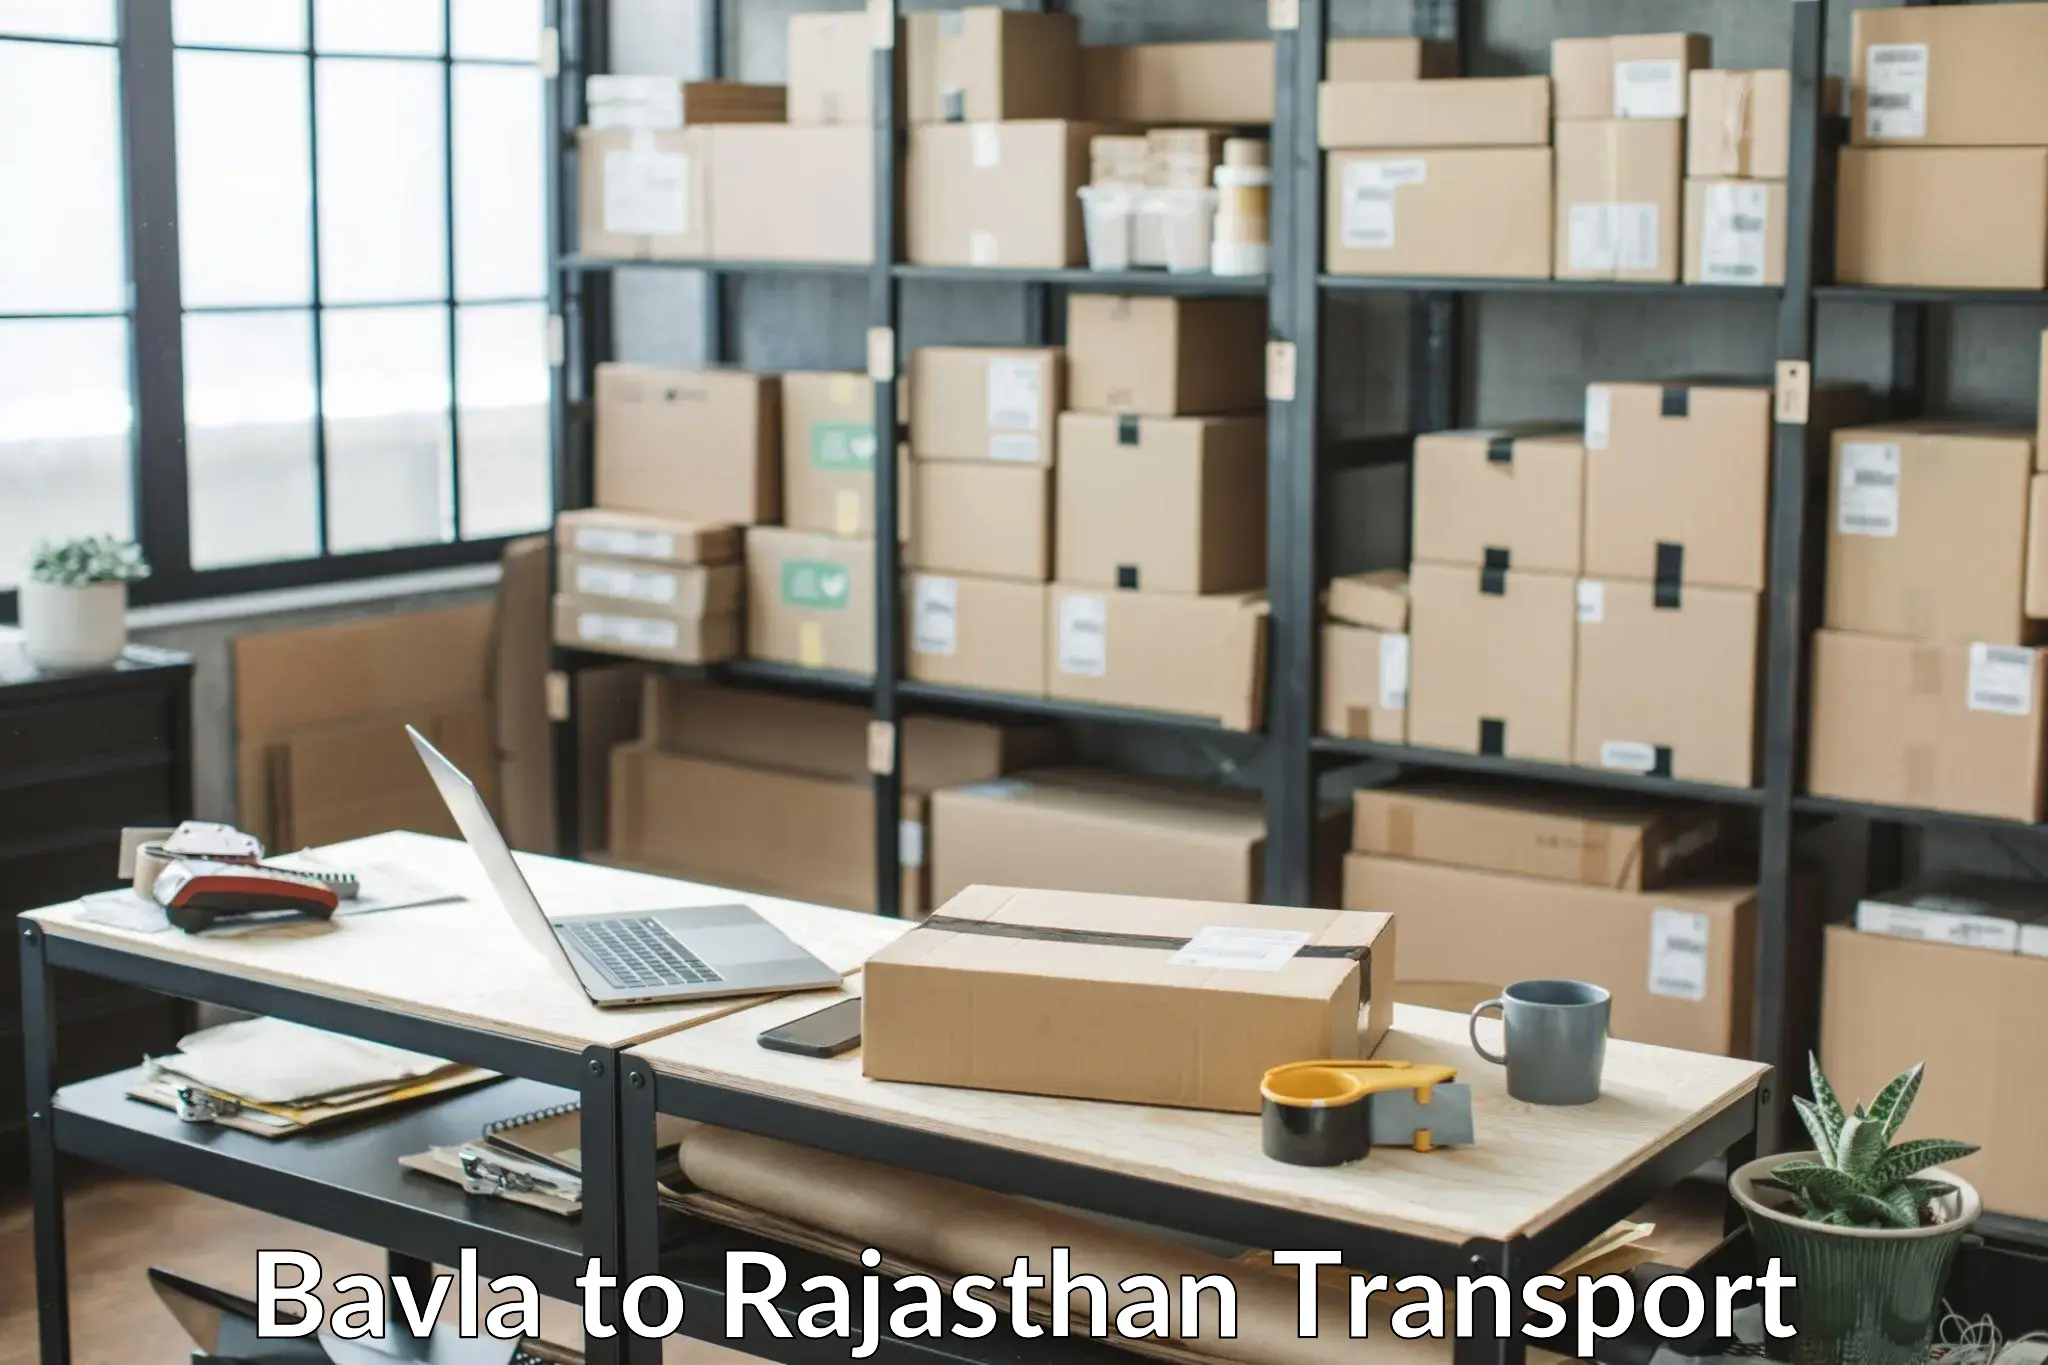 Container transport service Bavla to Rajasthan